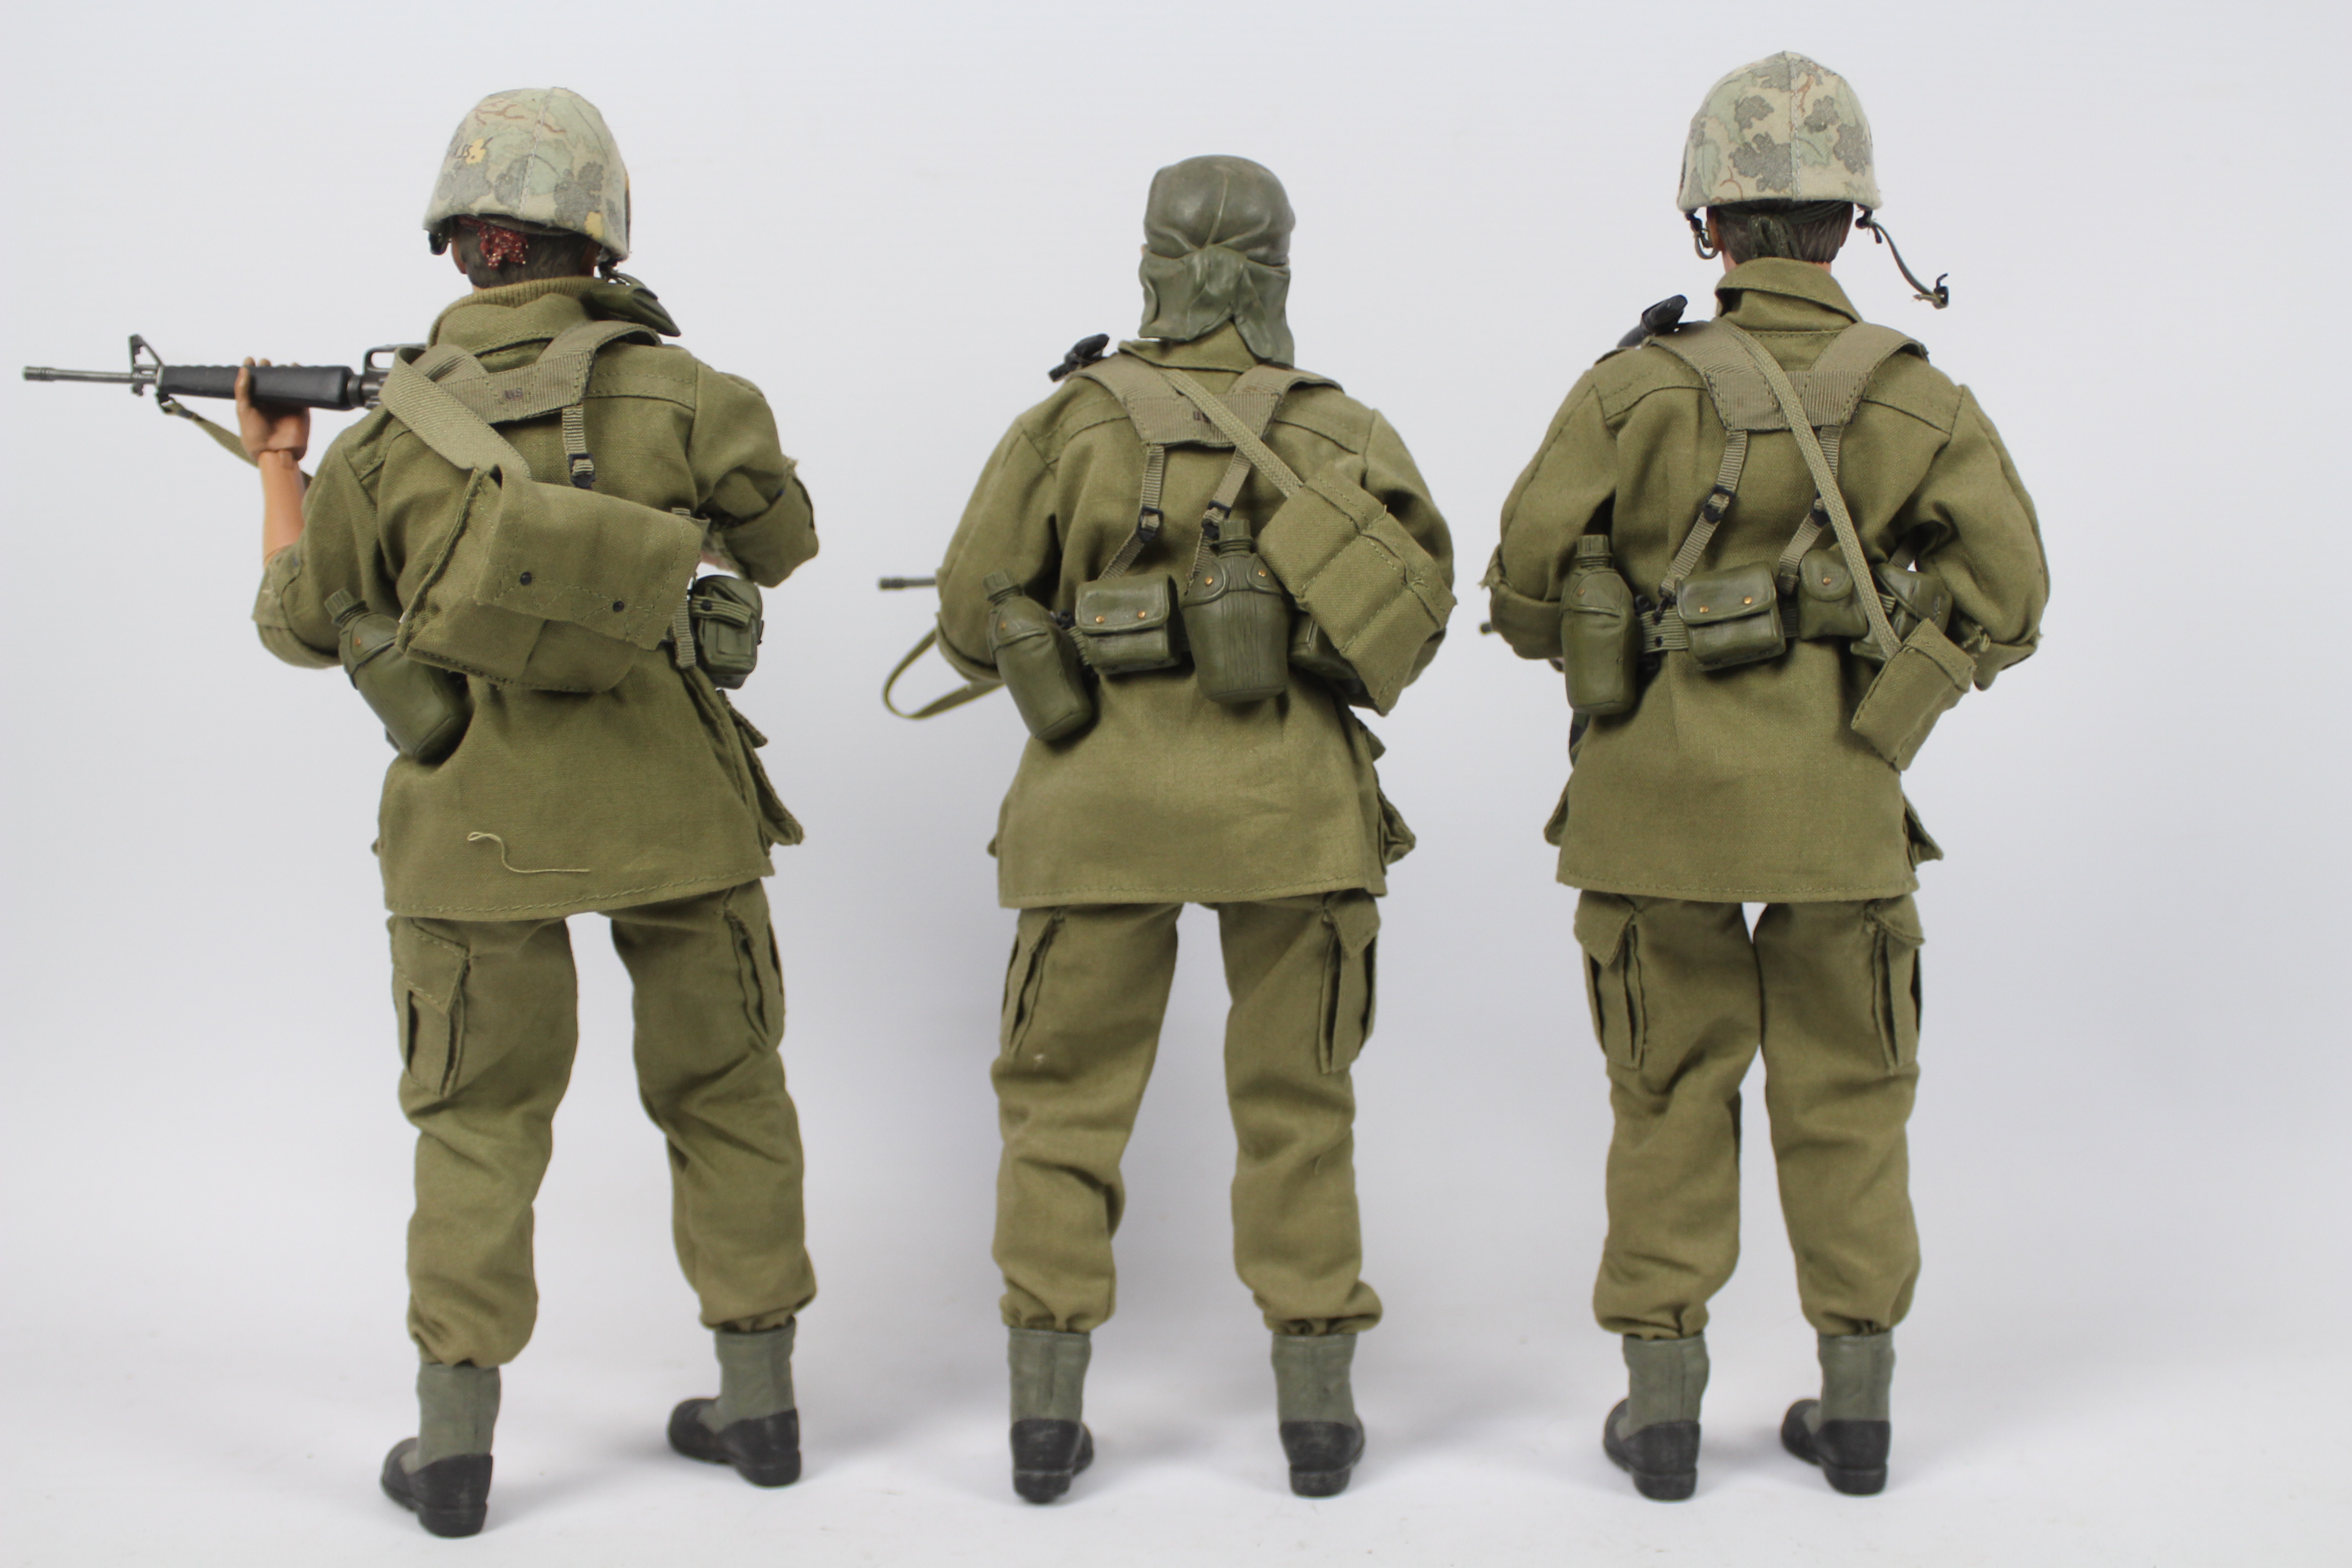 Sideshow Collectibles - Three unboxed 1:6 scale action figures from Sideshows 'Platoon' series, - Image 8 of 8